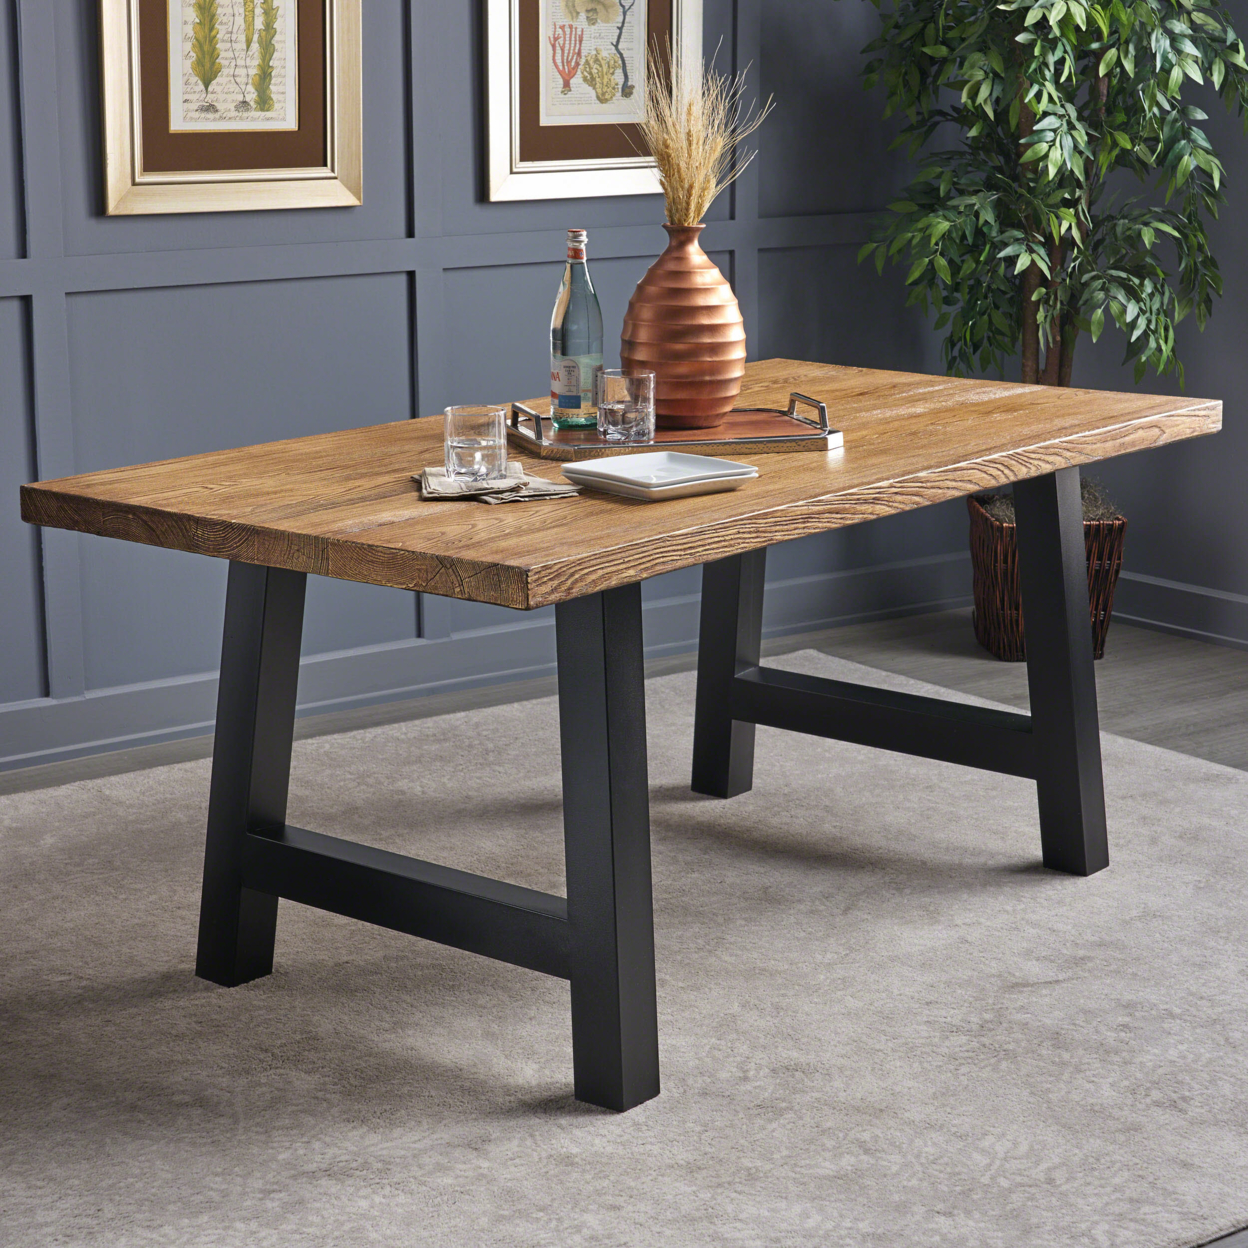 Edward Indoor Light Weight Concrete Dining Table - Natural Oak